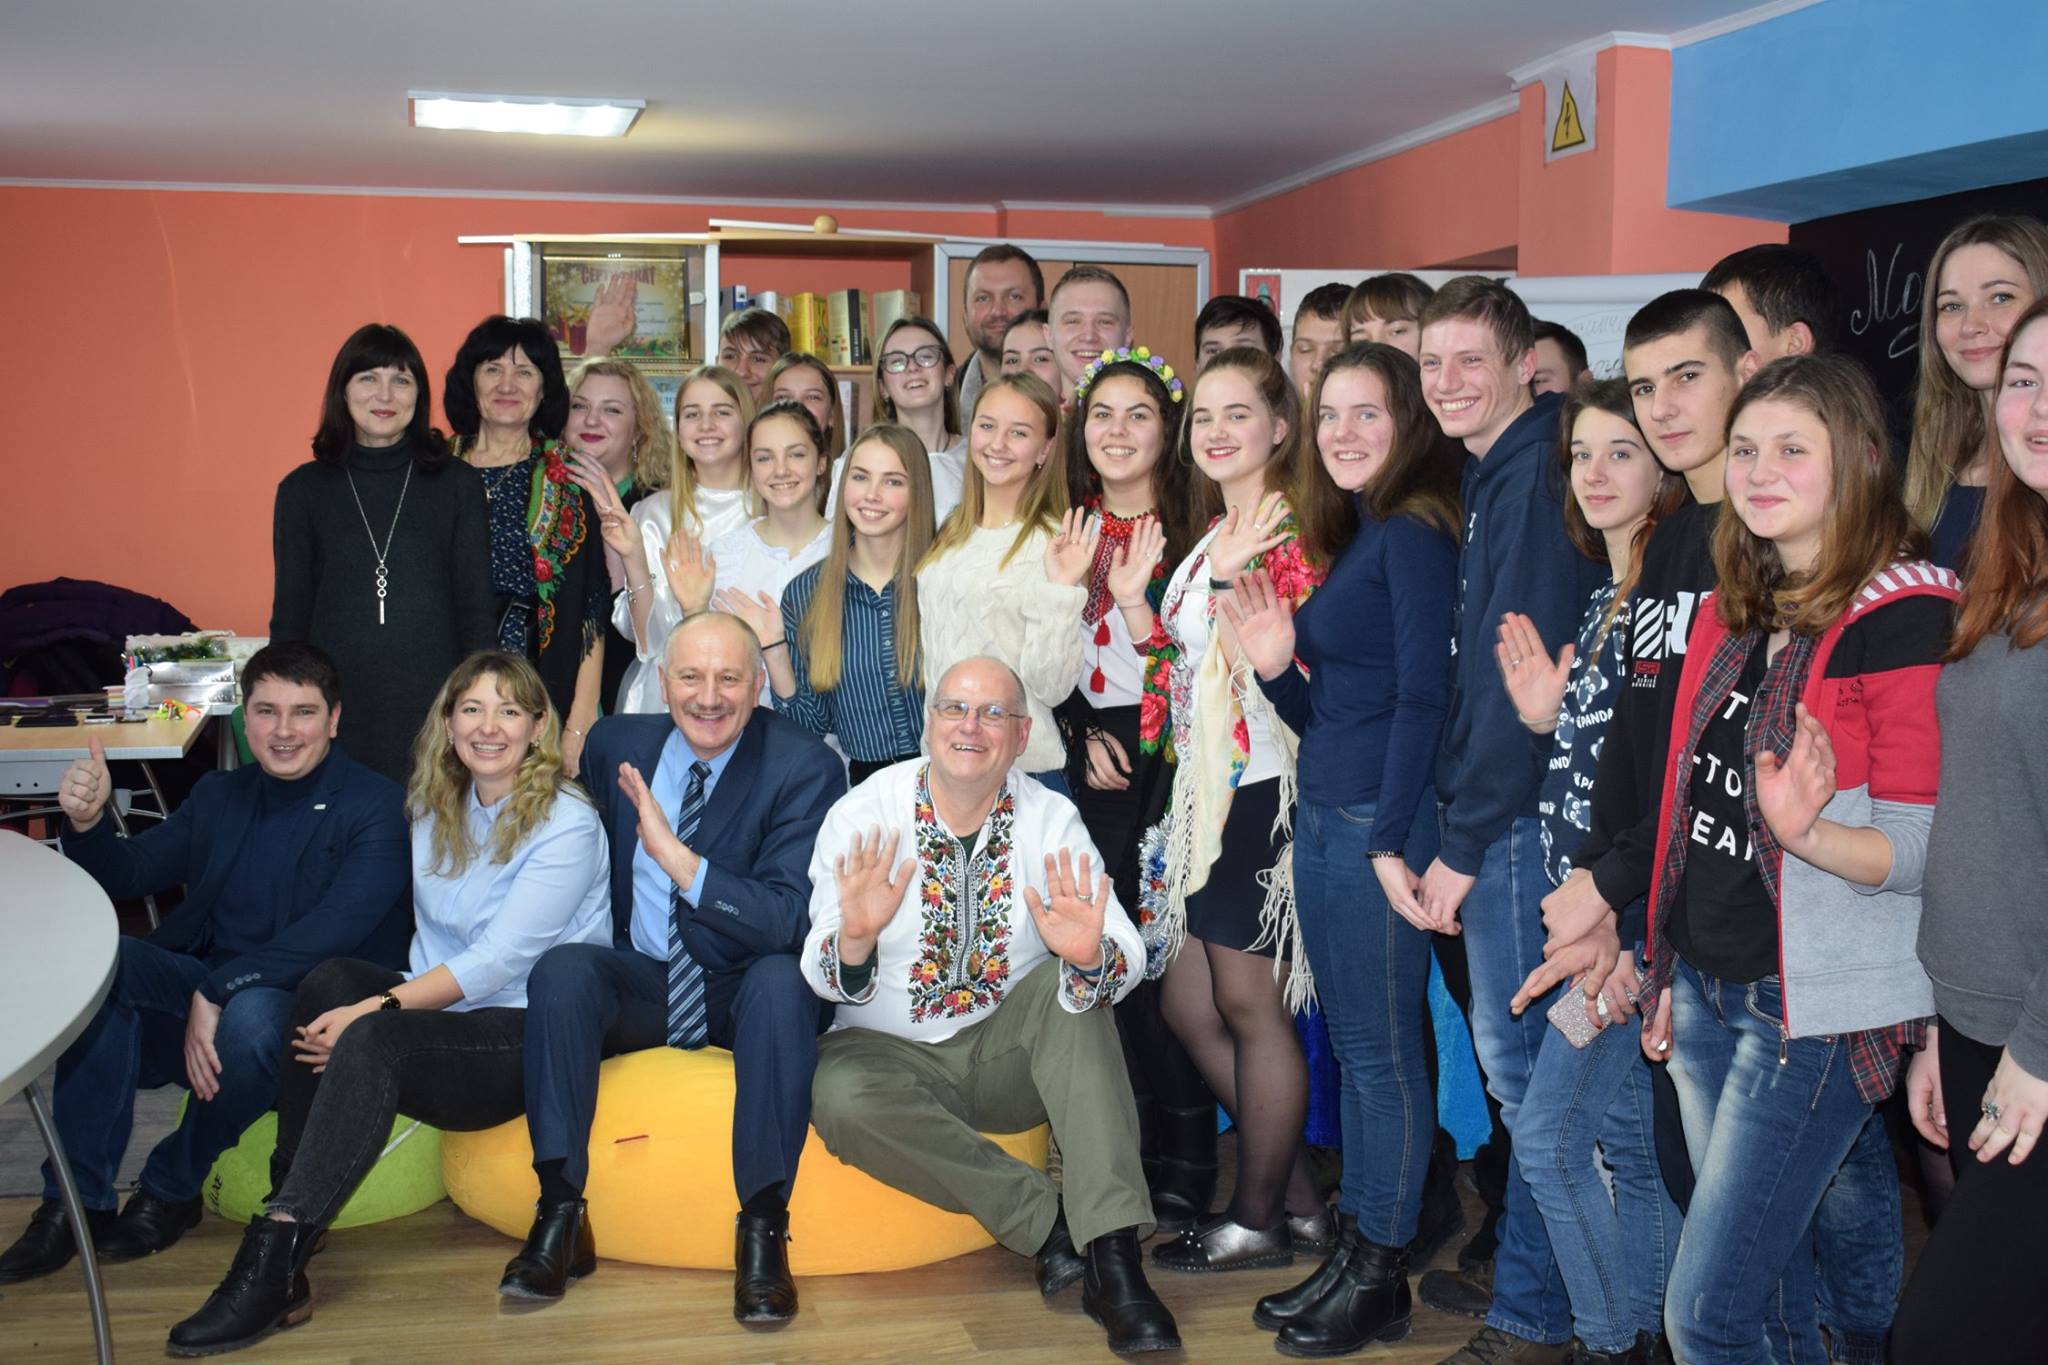 Youth Council members together with the Settlement Head and the DOBRE programme team